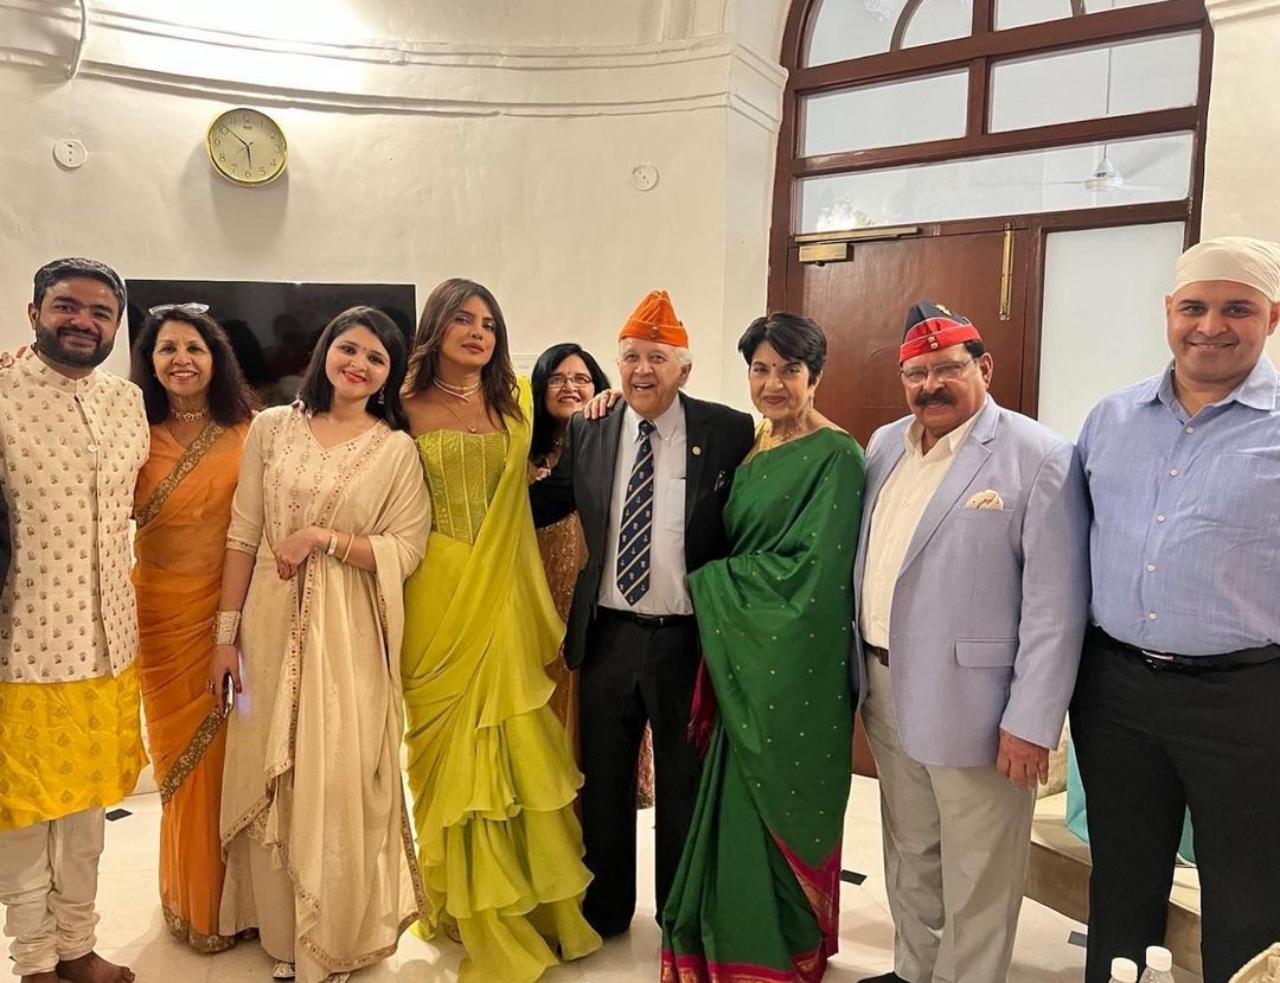 Priyanka Chopra, who is the cousin of the bride-to-be, took to her Instagram handle to wish the couple. While wishing the couple, Chopra also shared a happy family union picture on her gram 